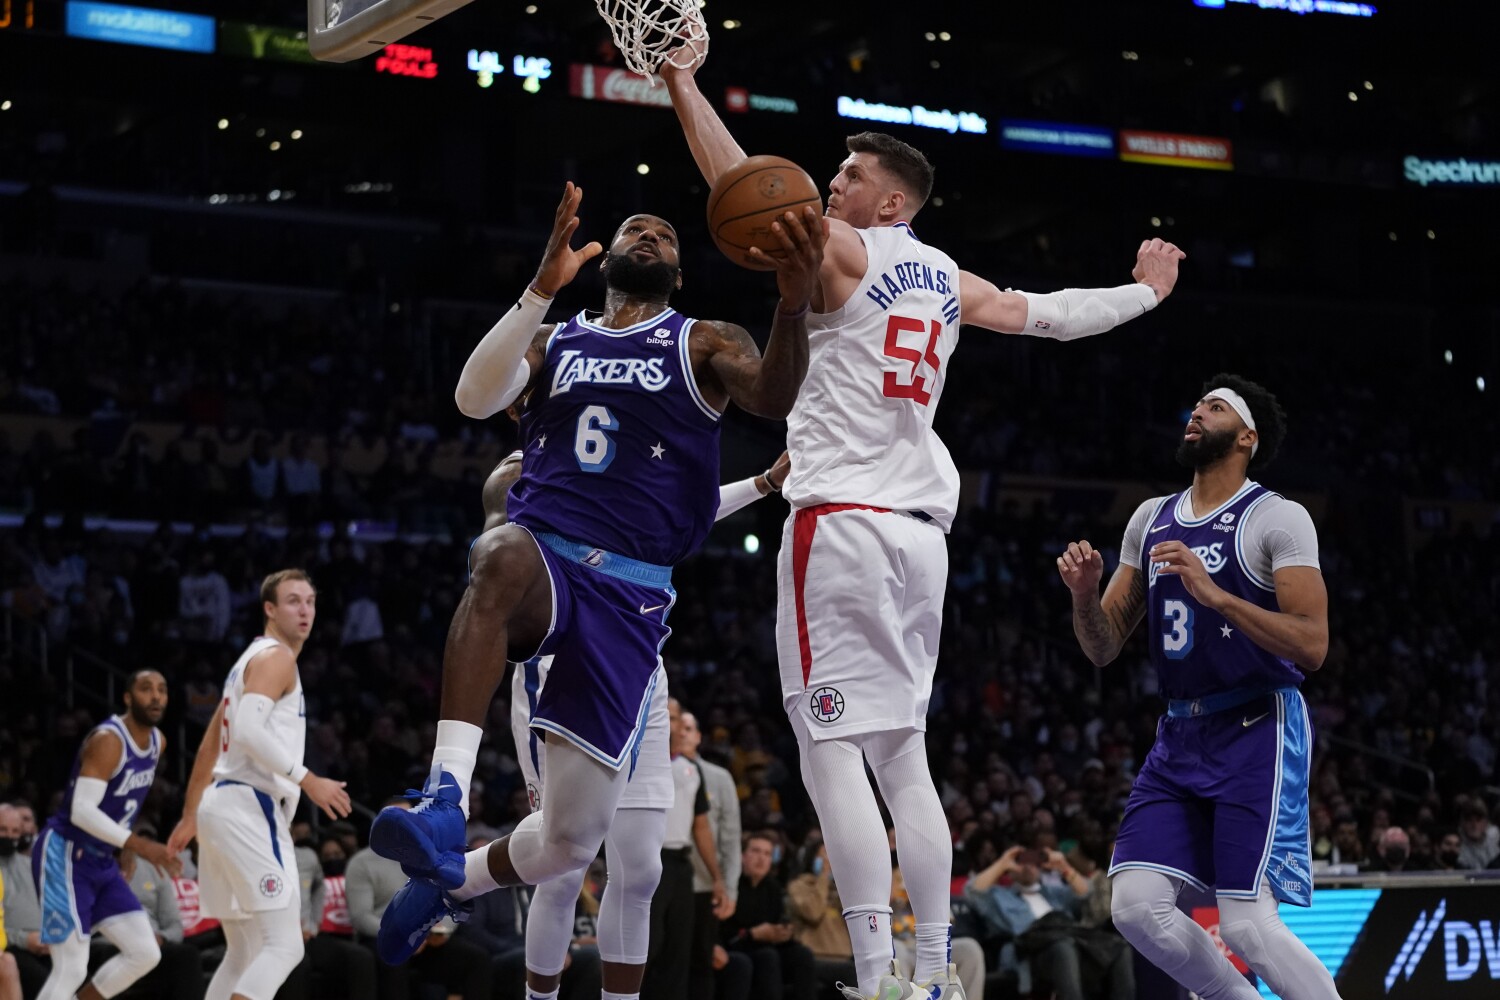 Clippers and Lakers will face off hungry for a win and elusive positive momentum